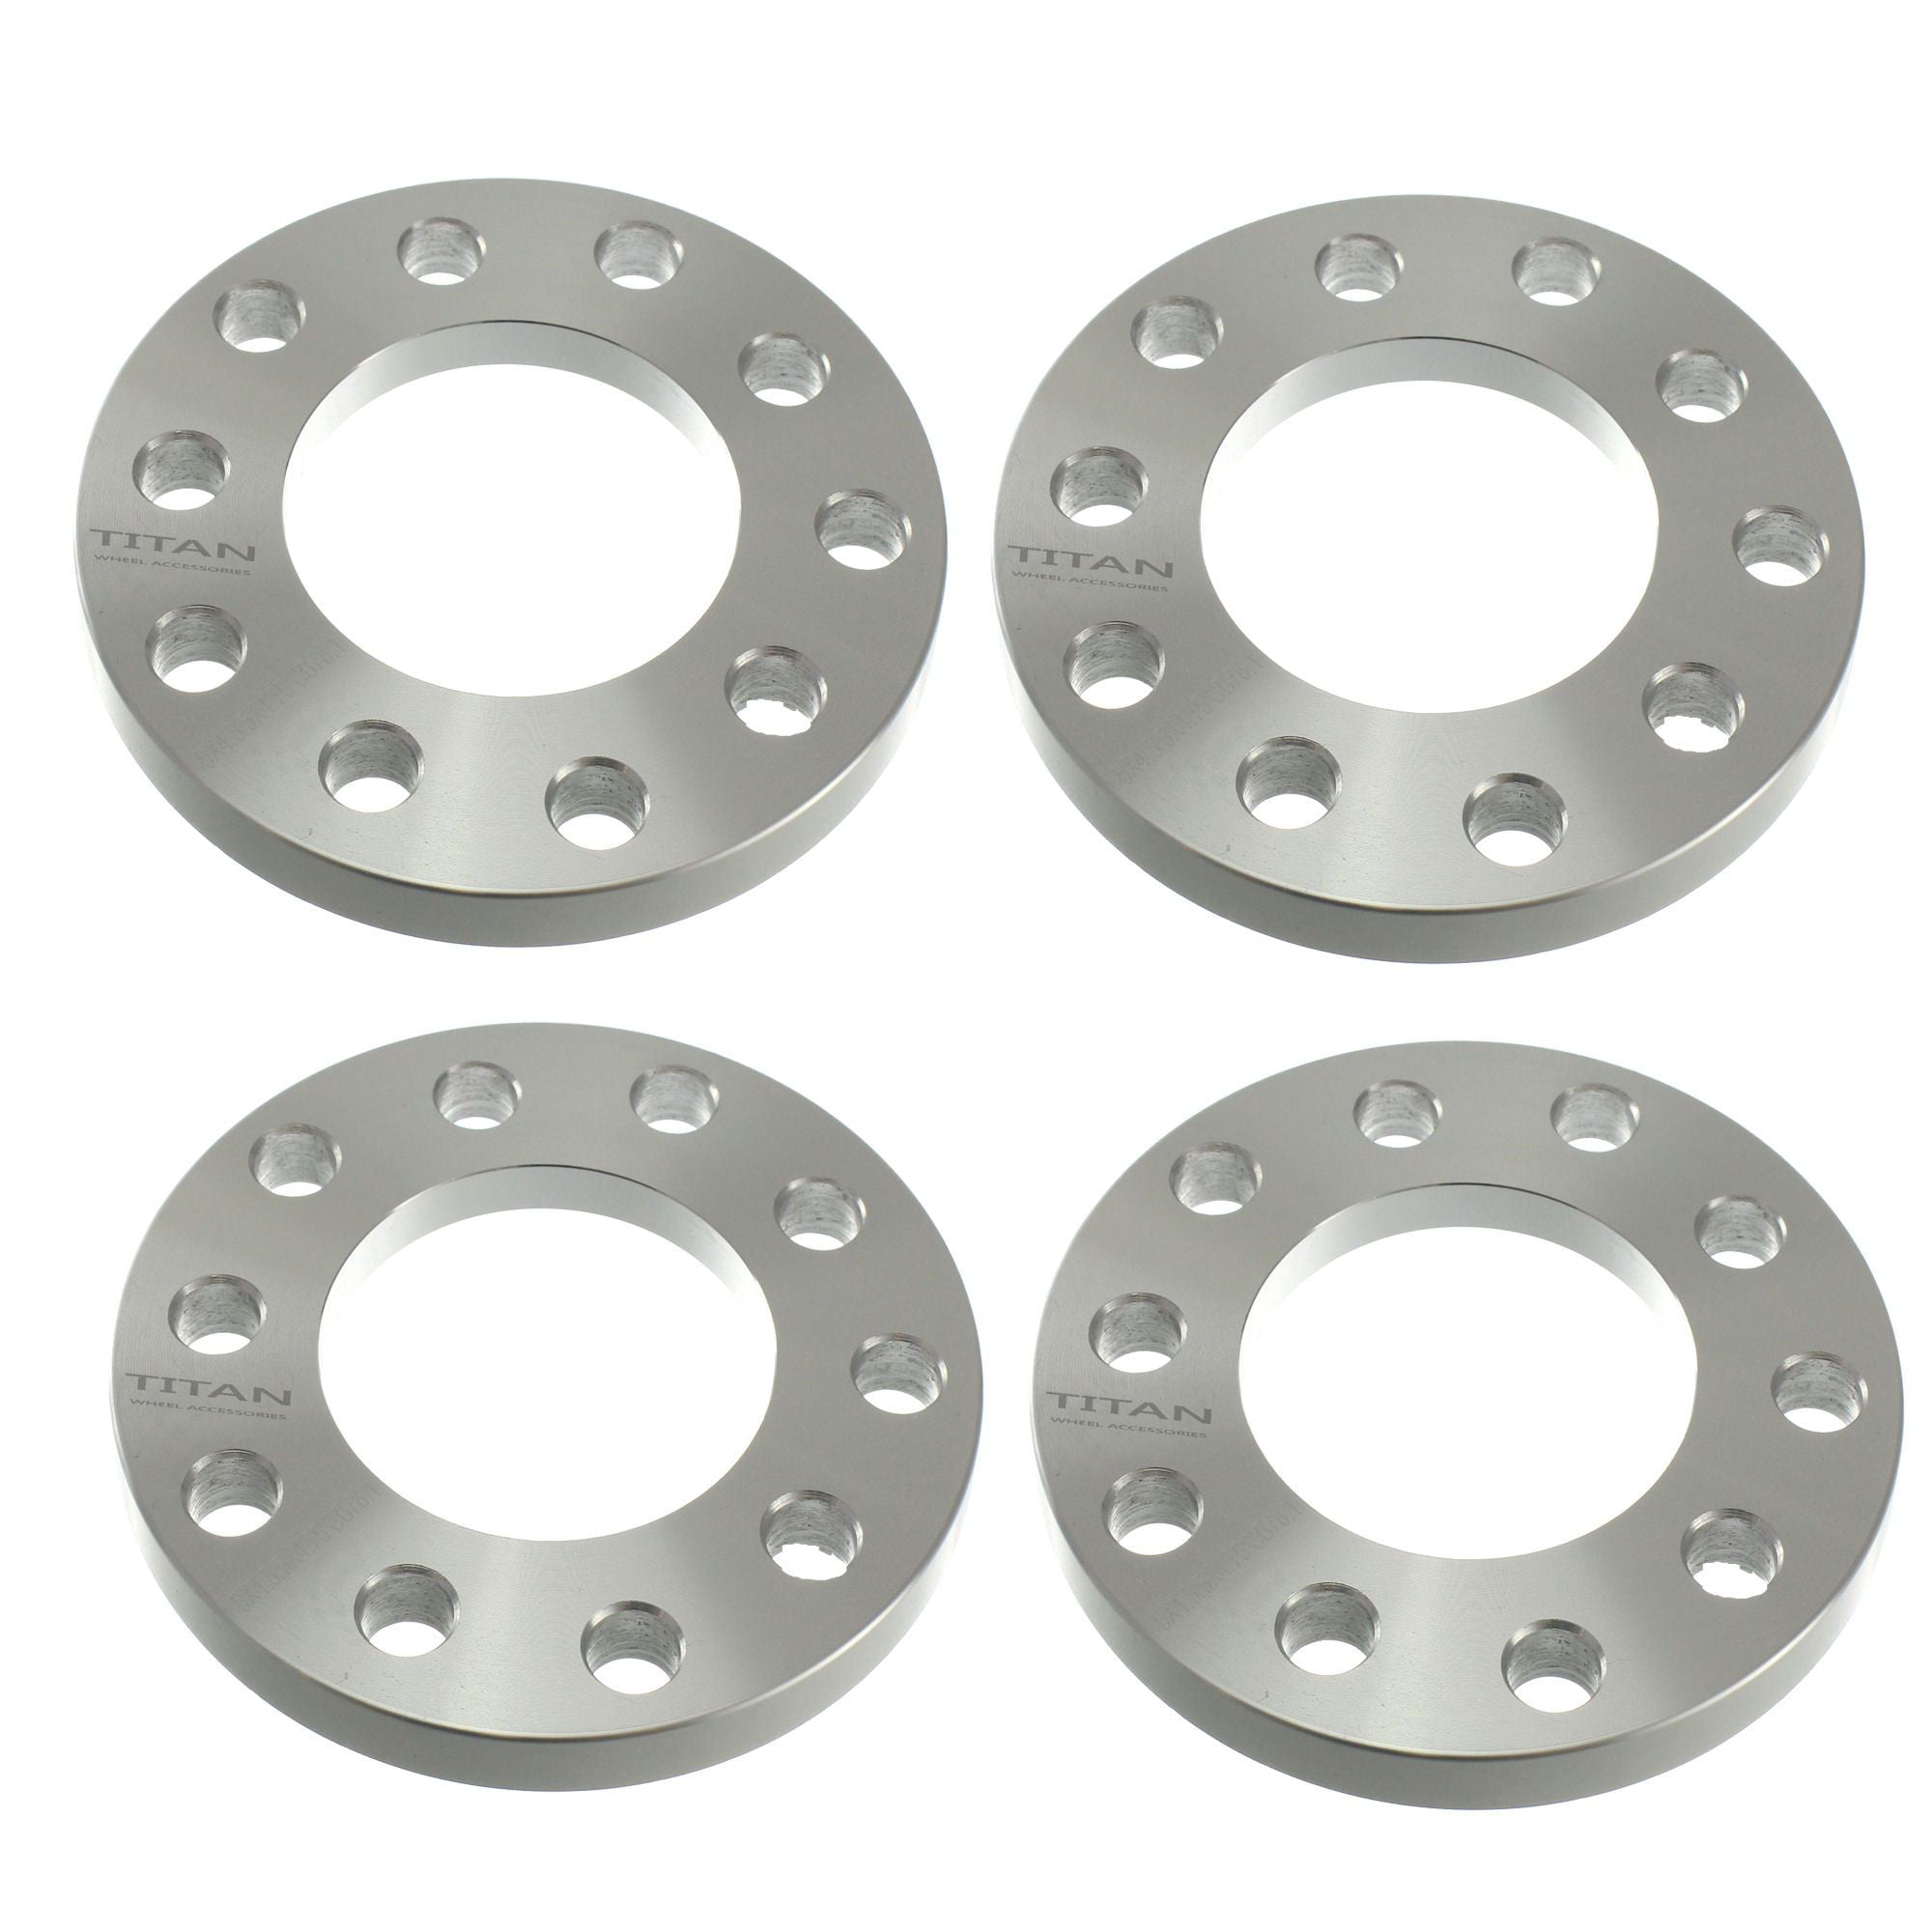 2pc-1-4-billet-wheel-spacers-5x5-or-5x127-bolt-pattern-25-thick